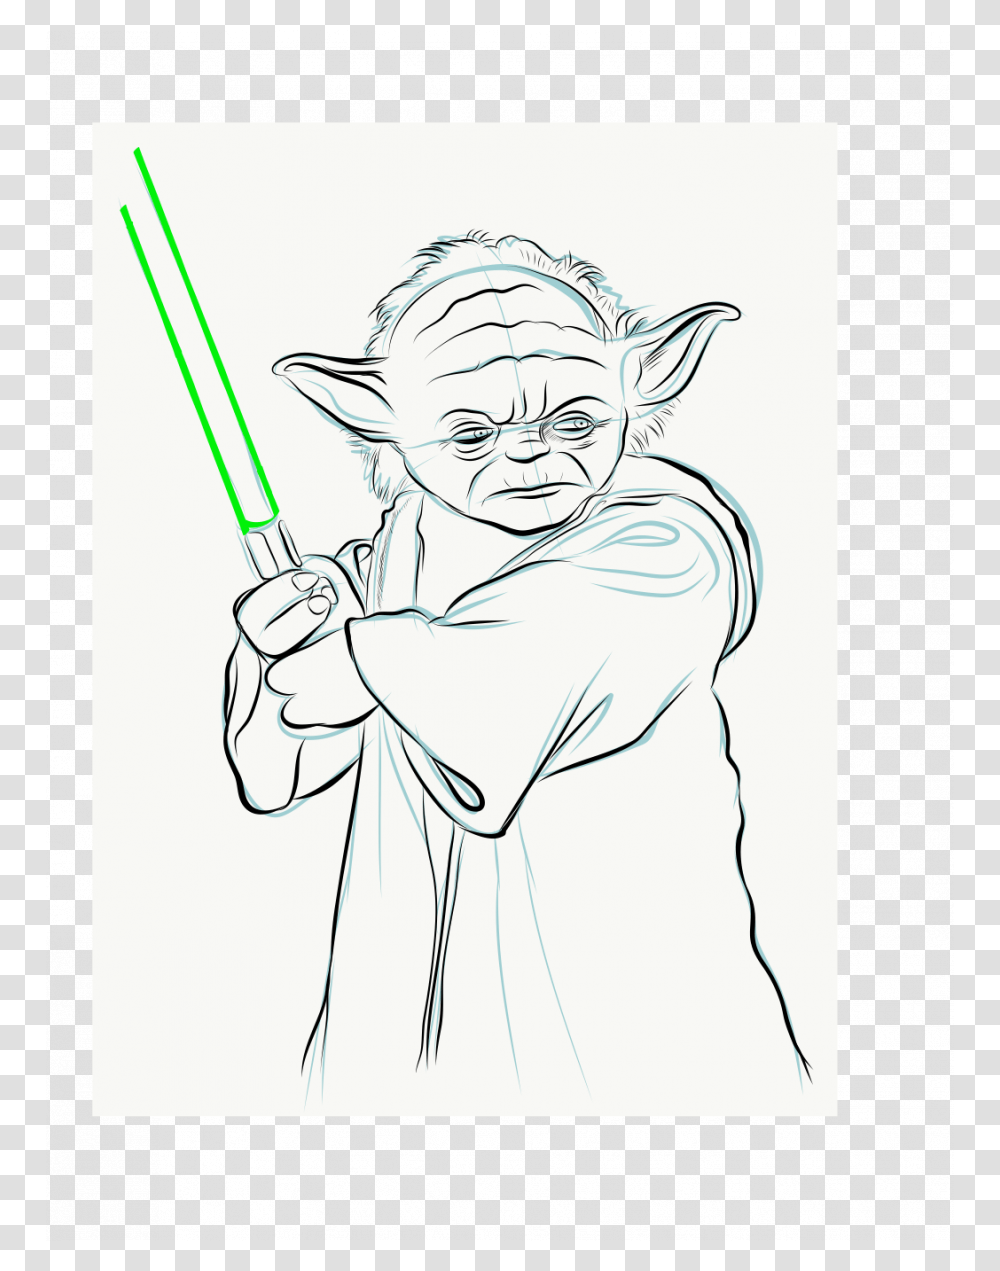 How To Draw A Cute Yoda From Star Wars Realistic Drawing Drawing, Person, Human, Sketch Transparent Png